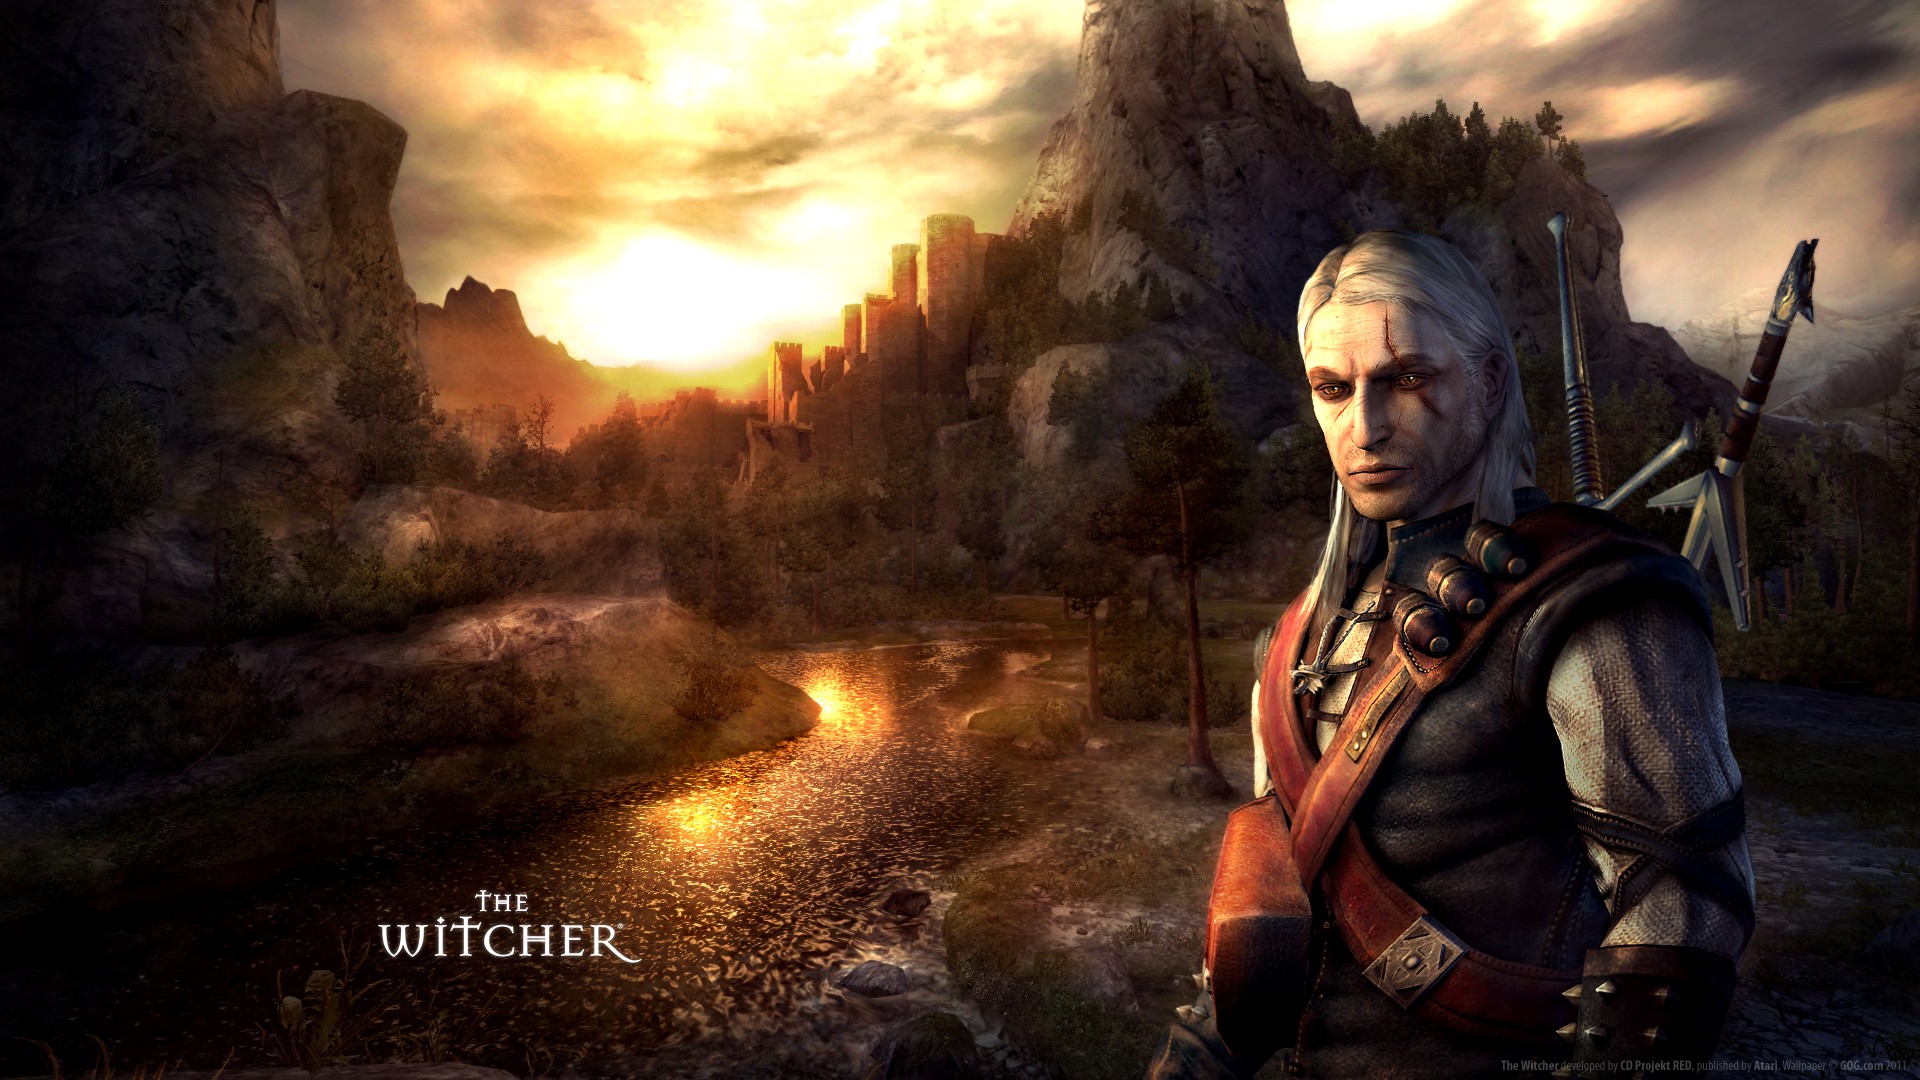 General 1920x1080 The Witcher Geralt of Rivia Kaer Morhen 2011 (Year) video games PC gaming video game men fantasy men RPG CD Projekt RED video game characters